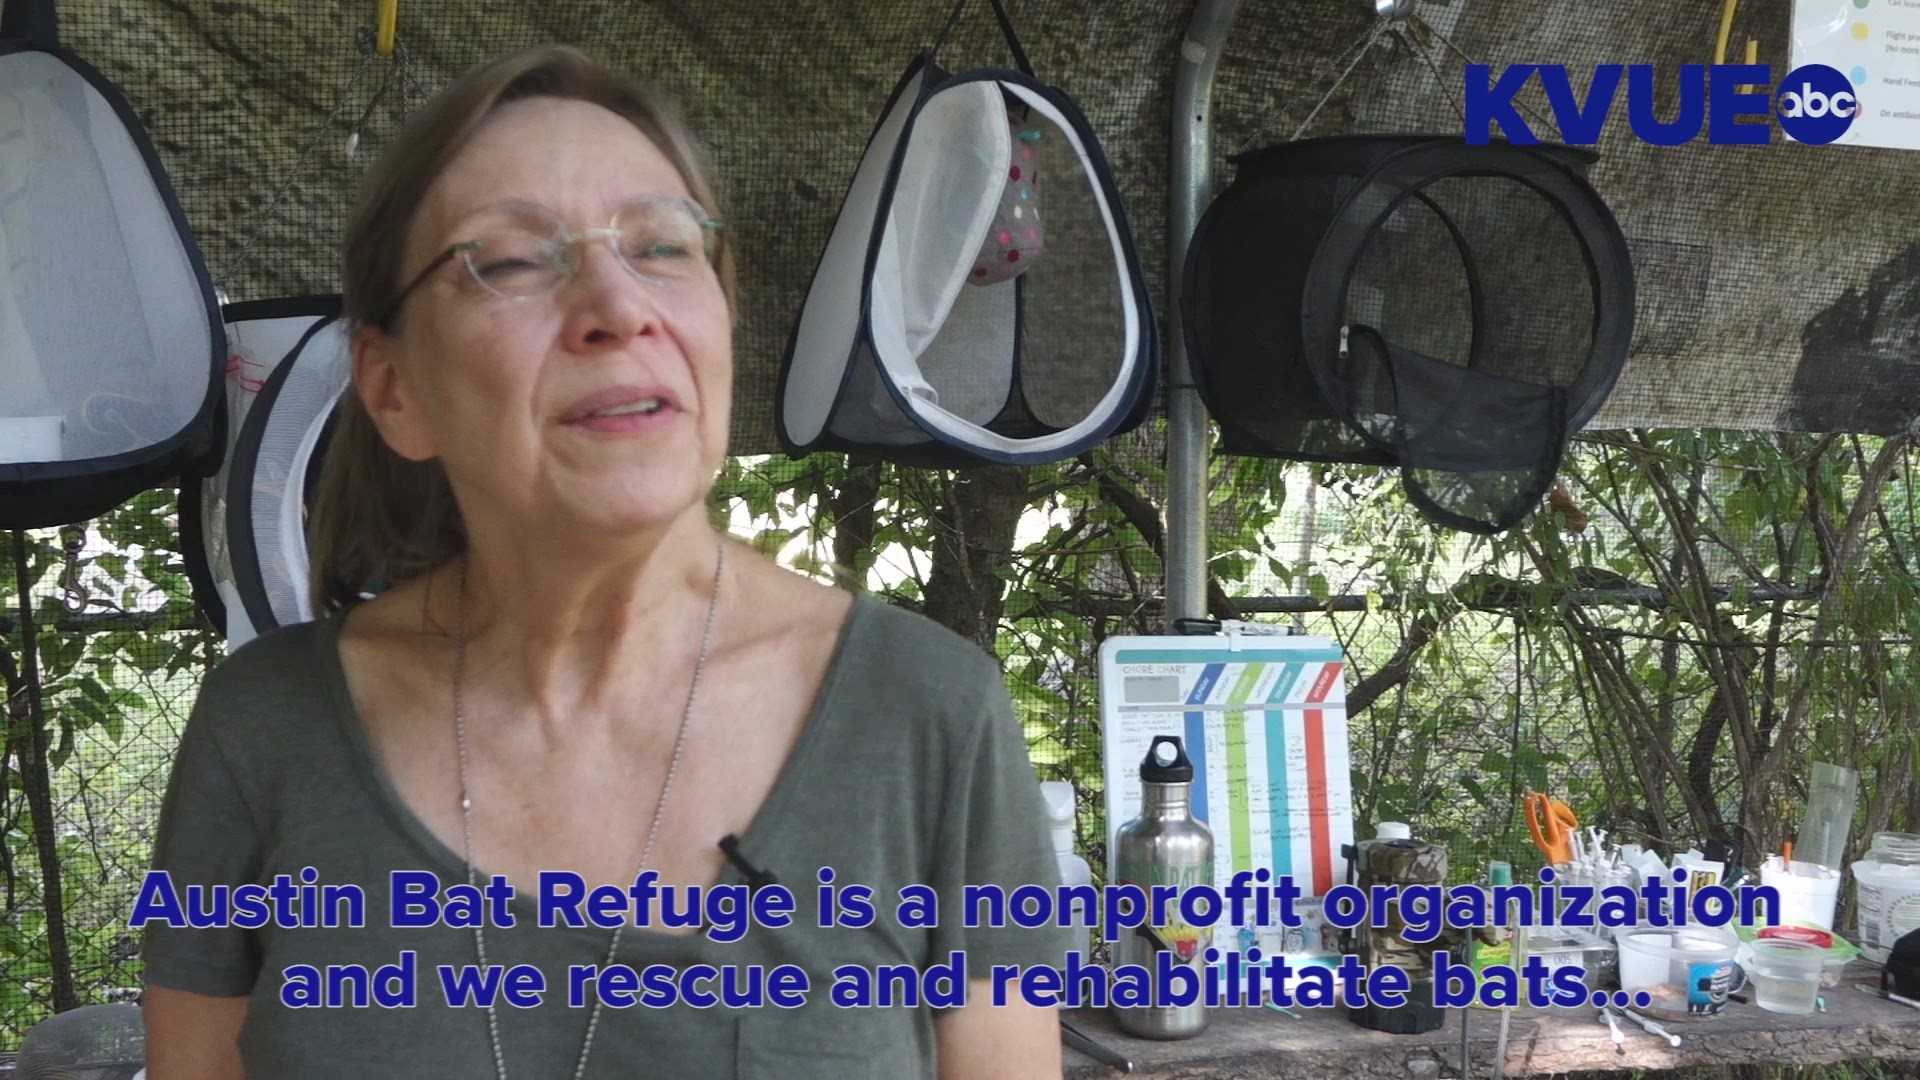 Dianne Odegard and Lee Mackenzie are the faces behind Austin Bat Refuge. Along with several volunteers, they work every day to take care of Austin's bats, rehabilitating those who aren't able to make it home safely after their nightly flights.